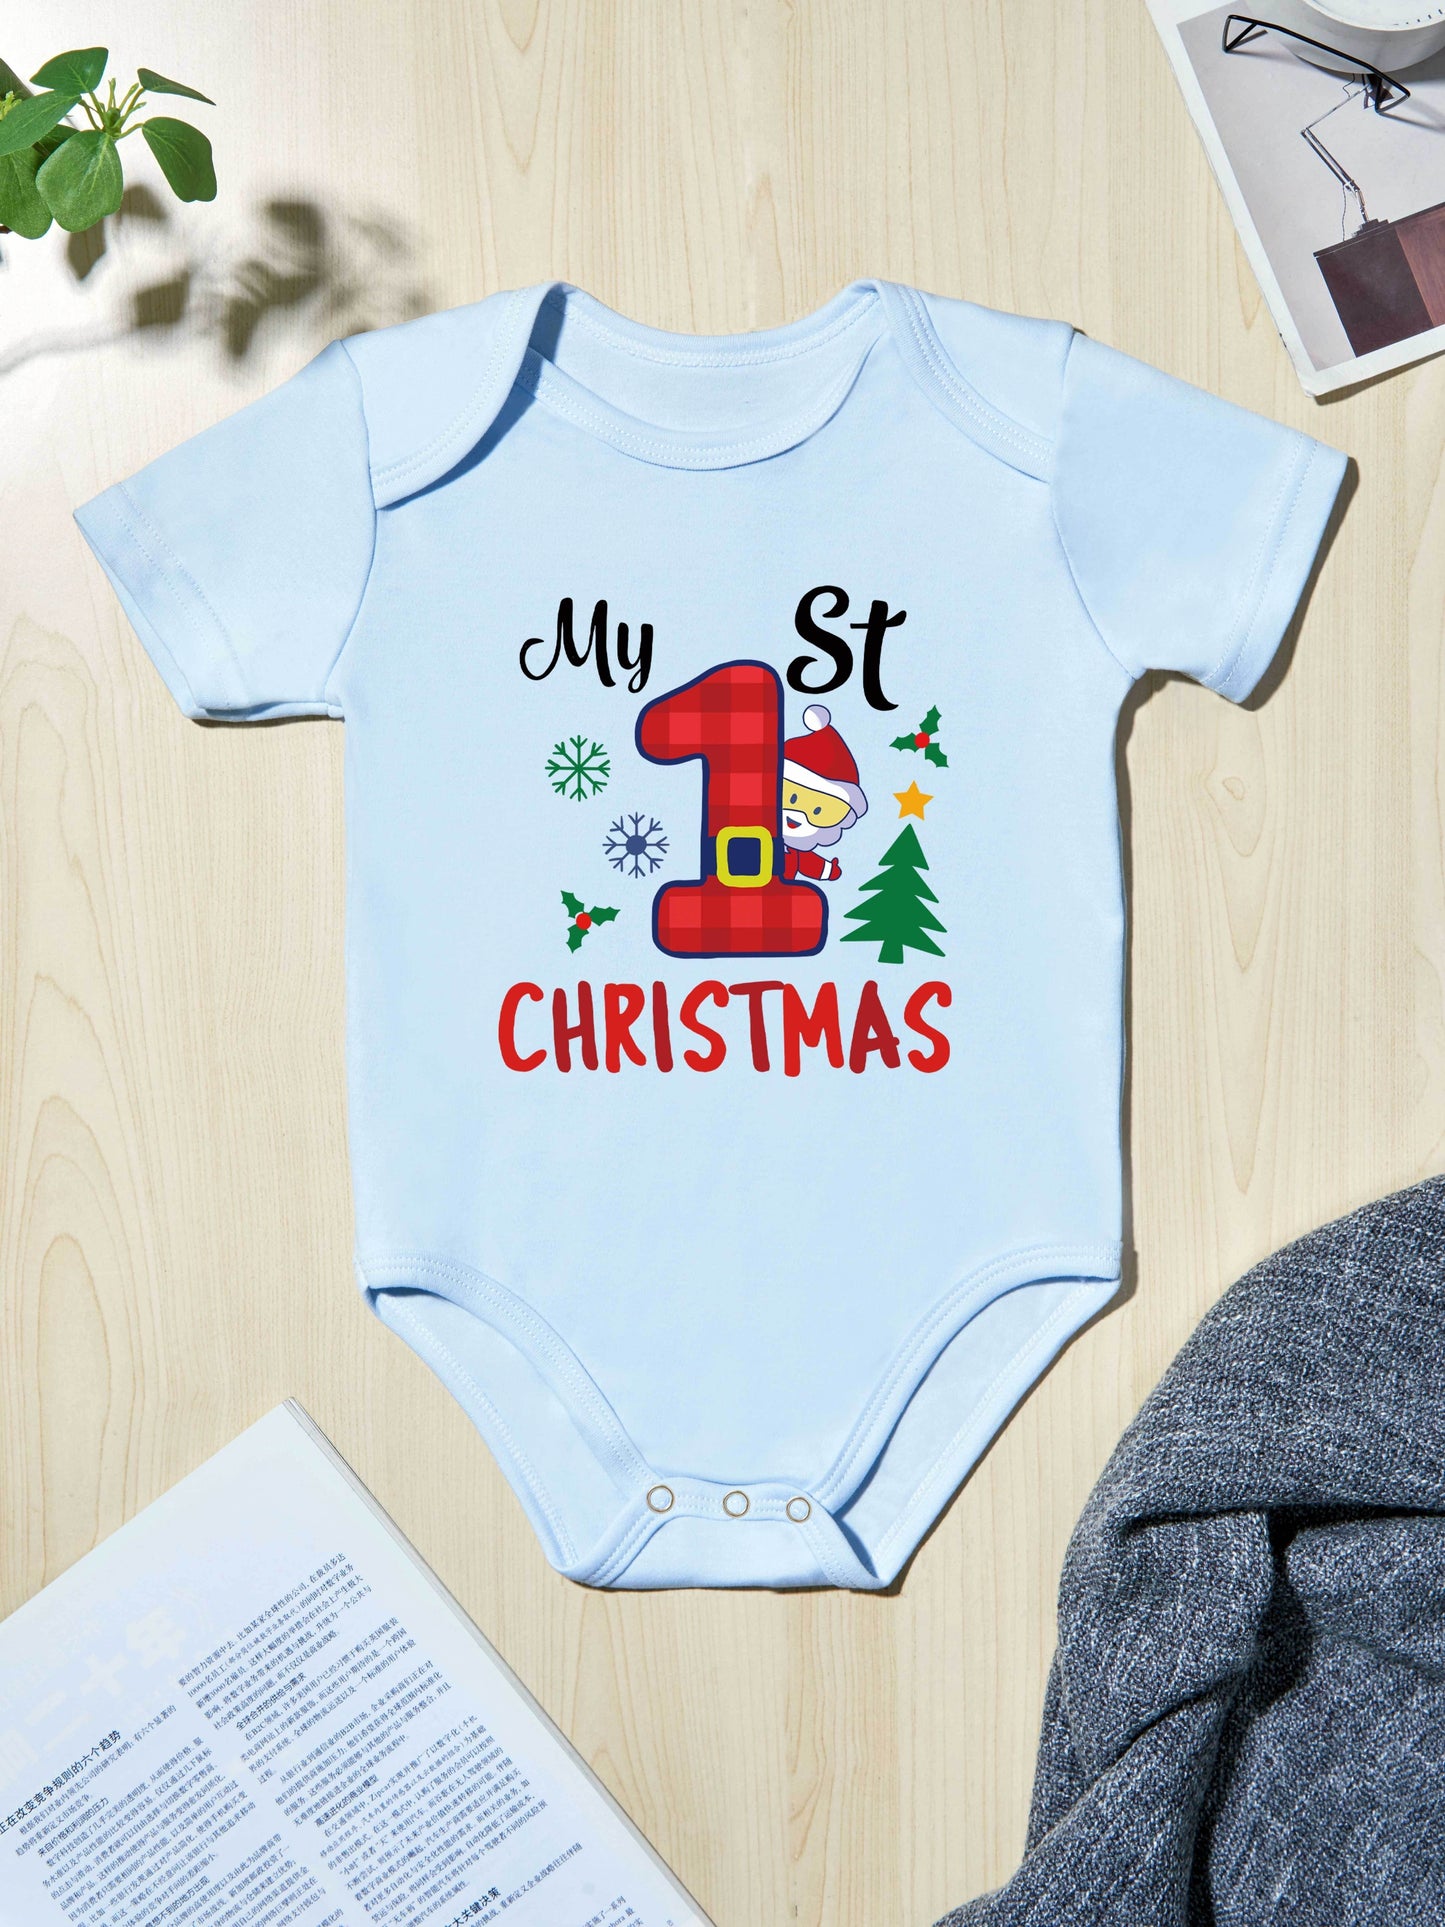 Christmas Baby Clothes Newborn Onesie For Baby Boys And Girls Cute Cartoon Letter Print Short Sleeve Romper